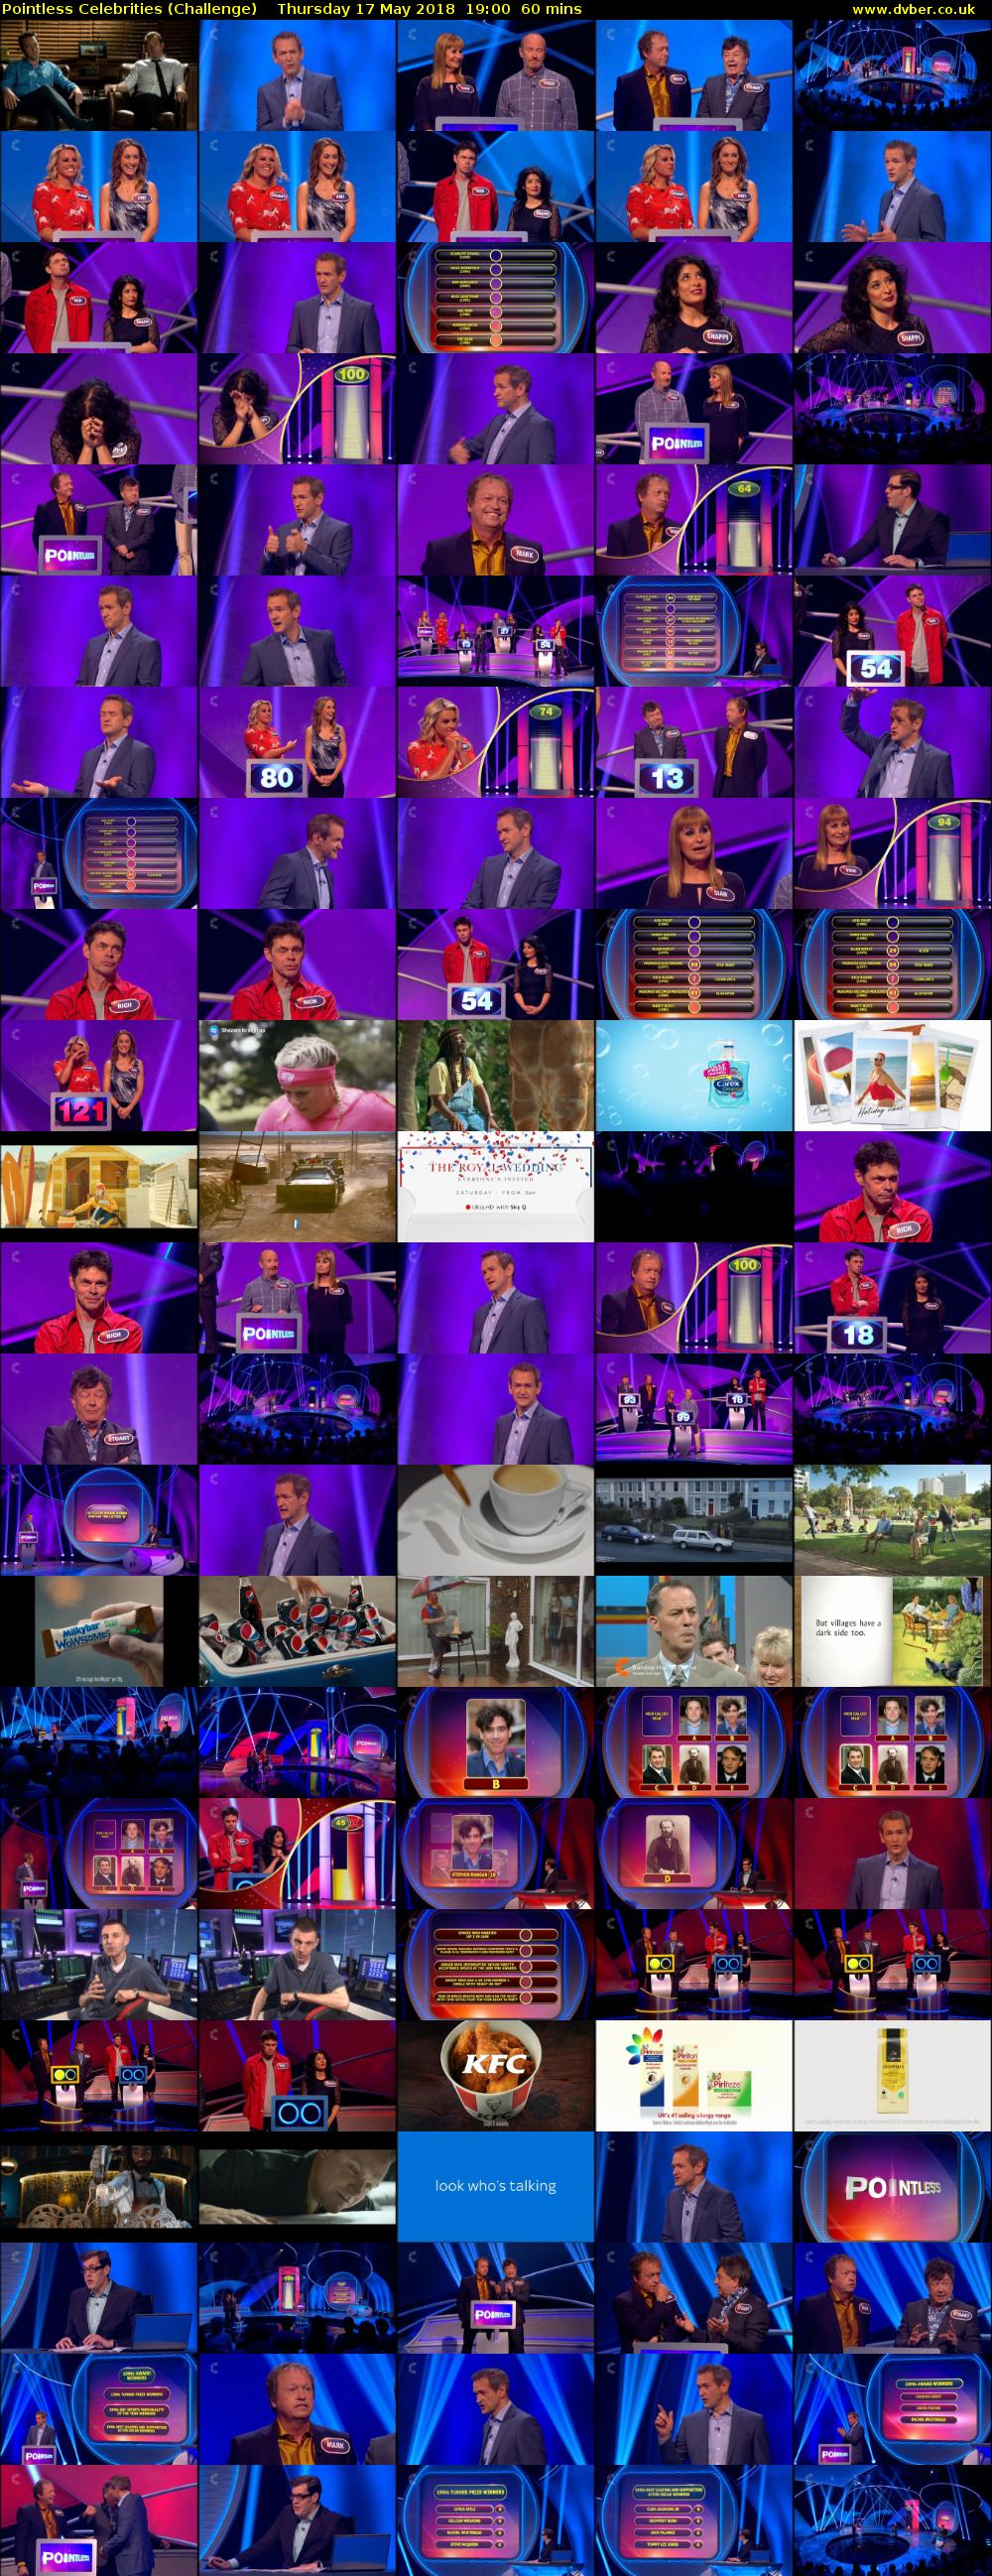 Pointless Celebrities (Challenge) Thursday 17 May 2018 19:00 - 20:00